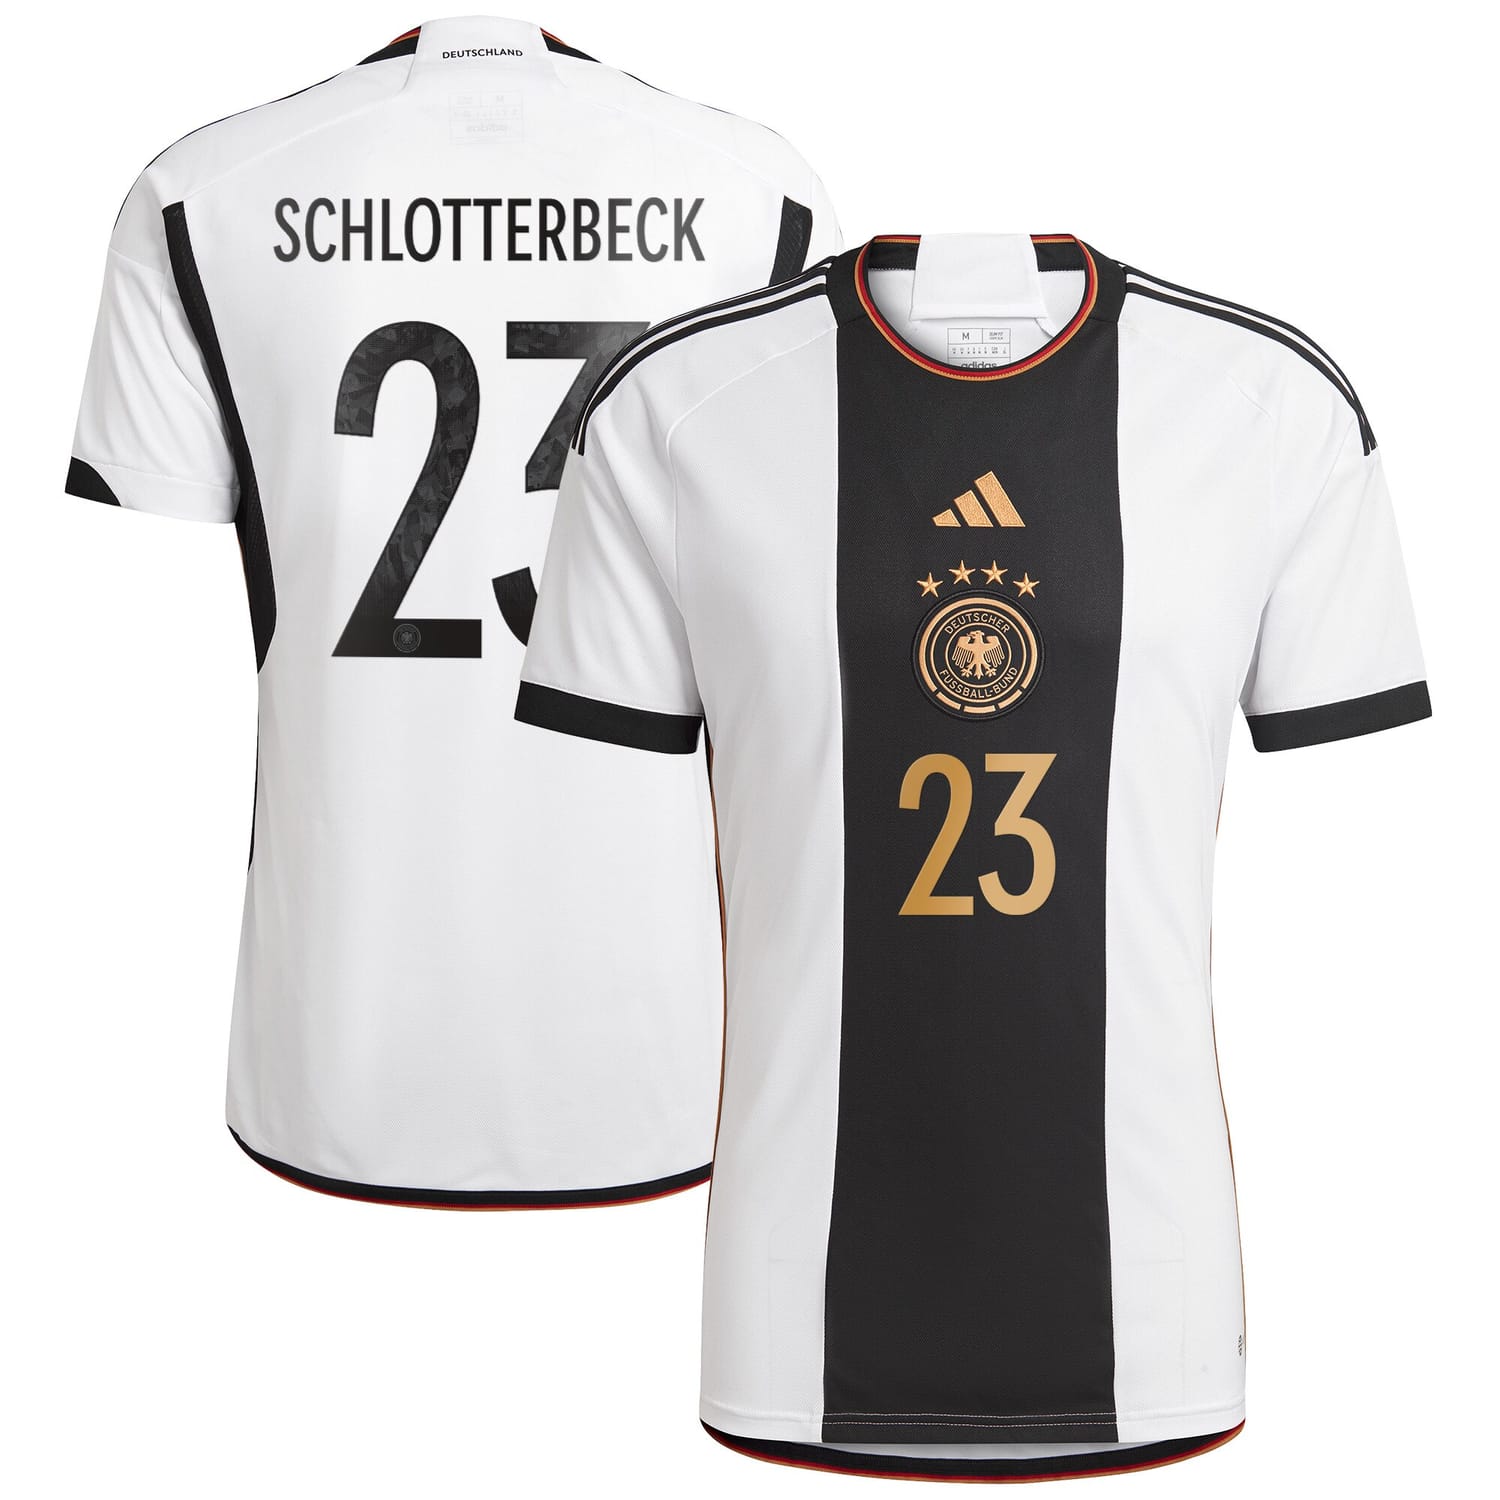 Germany National Team Home Jersey Shirt player Nico Schlotterbeck 23 printing for Men